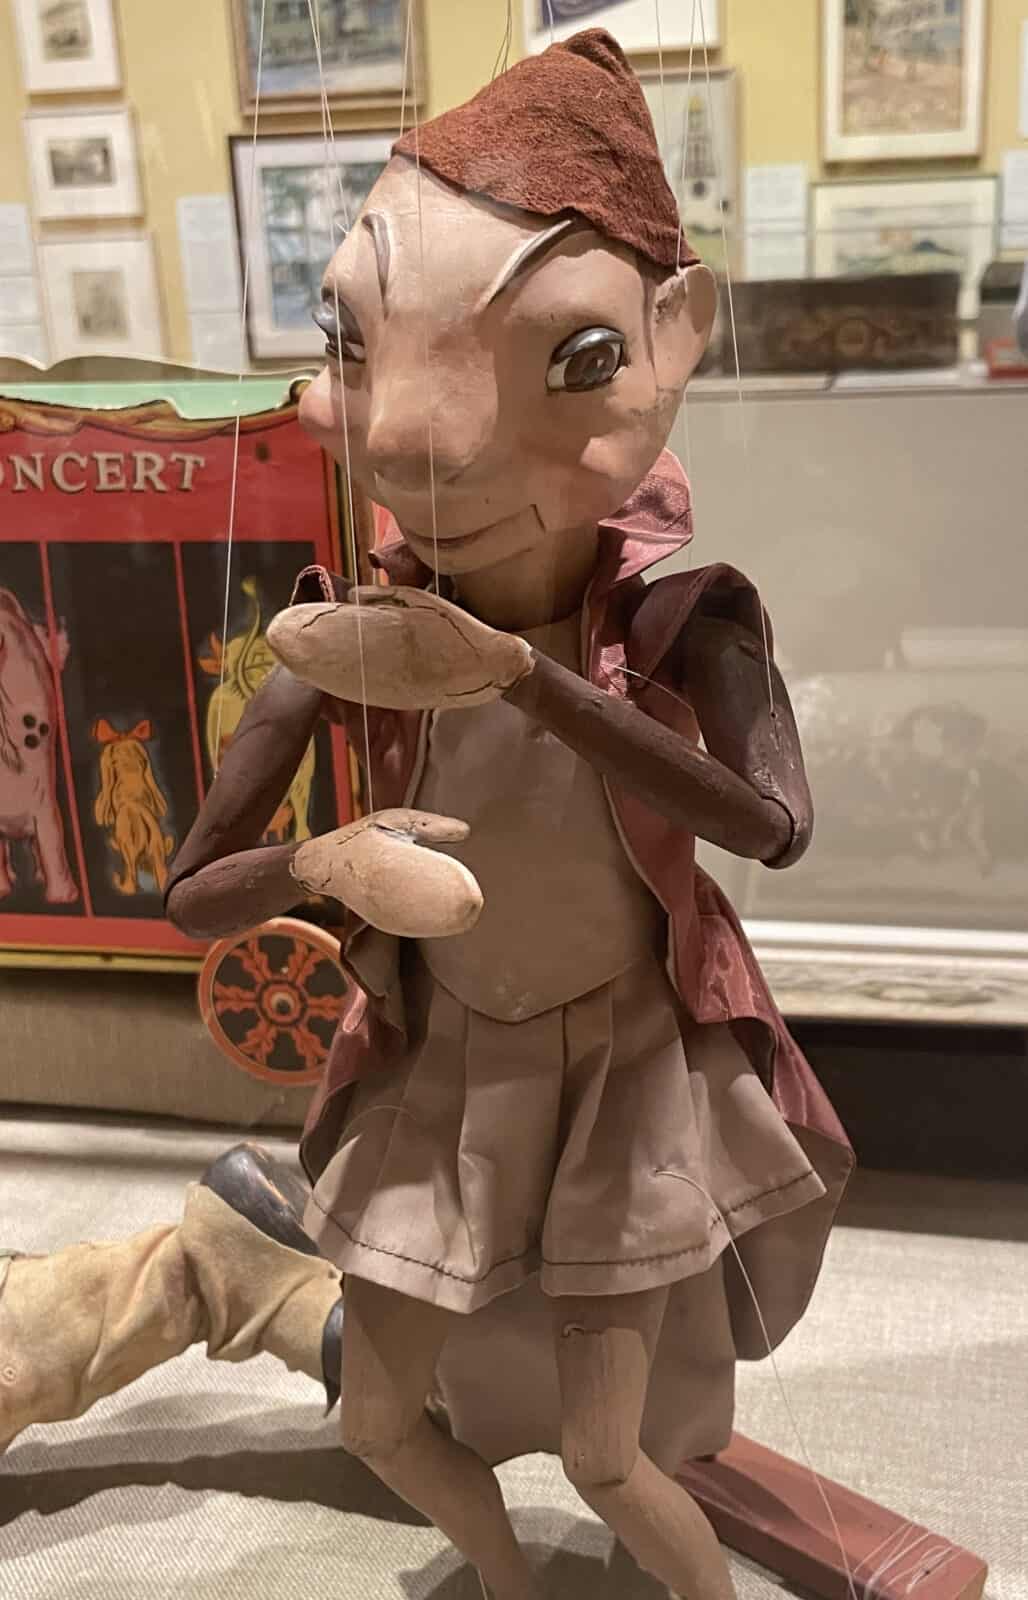 A puppet with eyebrows and ears suggestive of an elf or a firefly joins Tony Sarg's puppet theater cast of Pinocchio, with Sarg's artwork on the wall behind. Press photo by Kate Abbott, courtesy of the Norman Rockwell Museum